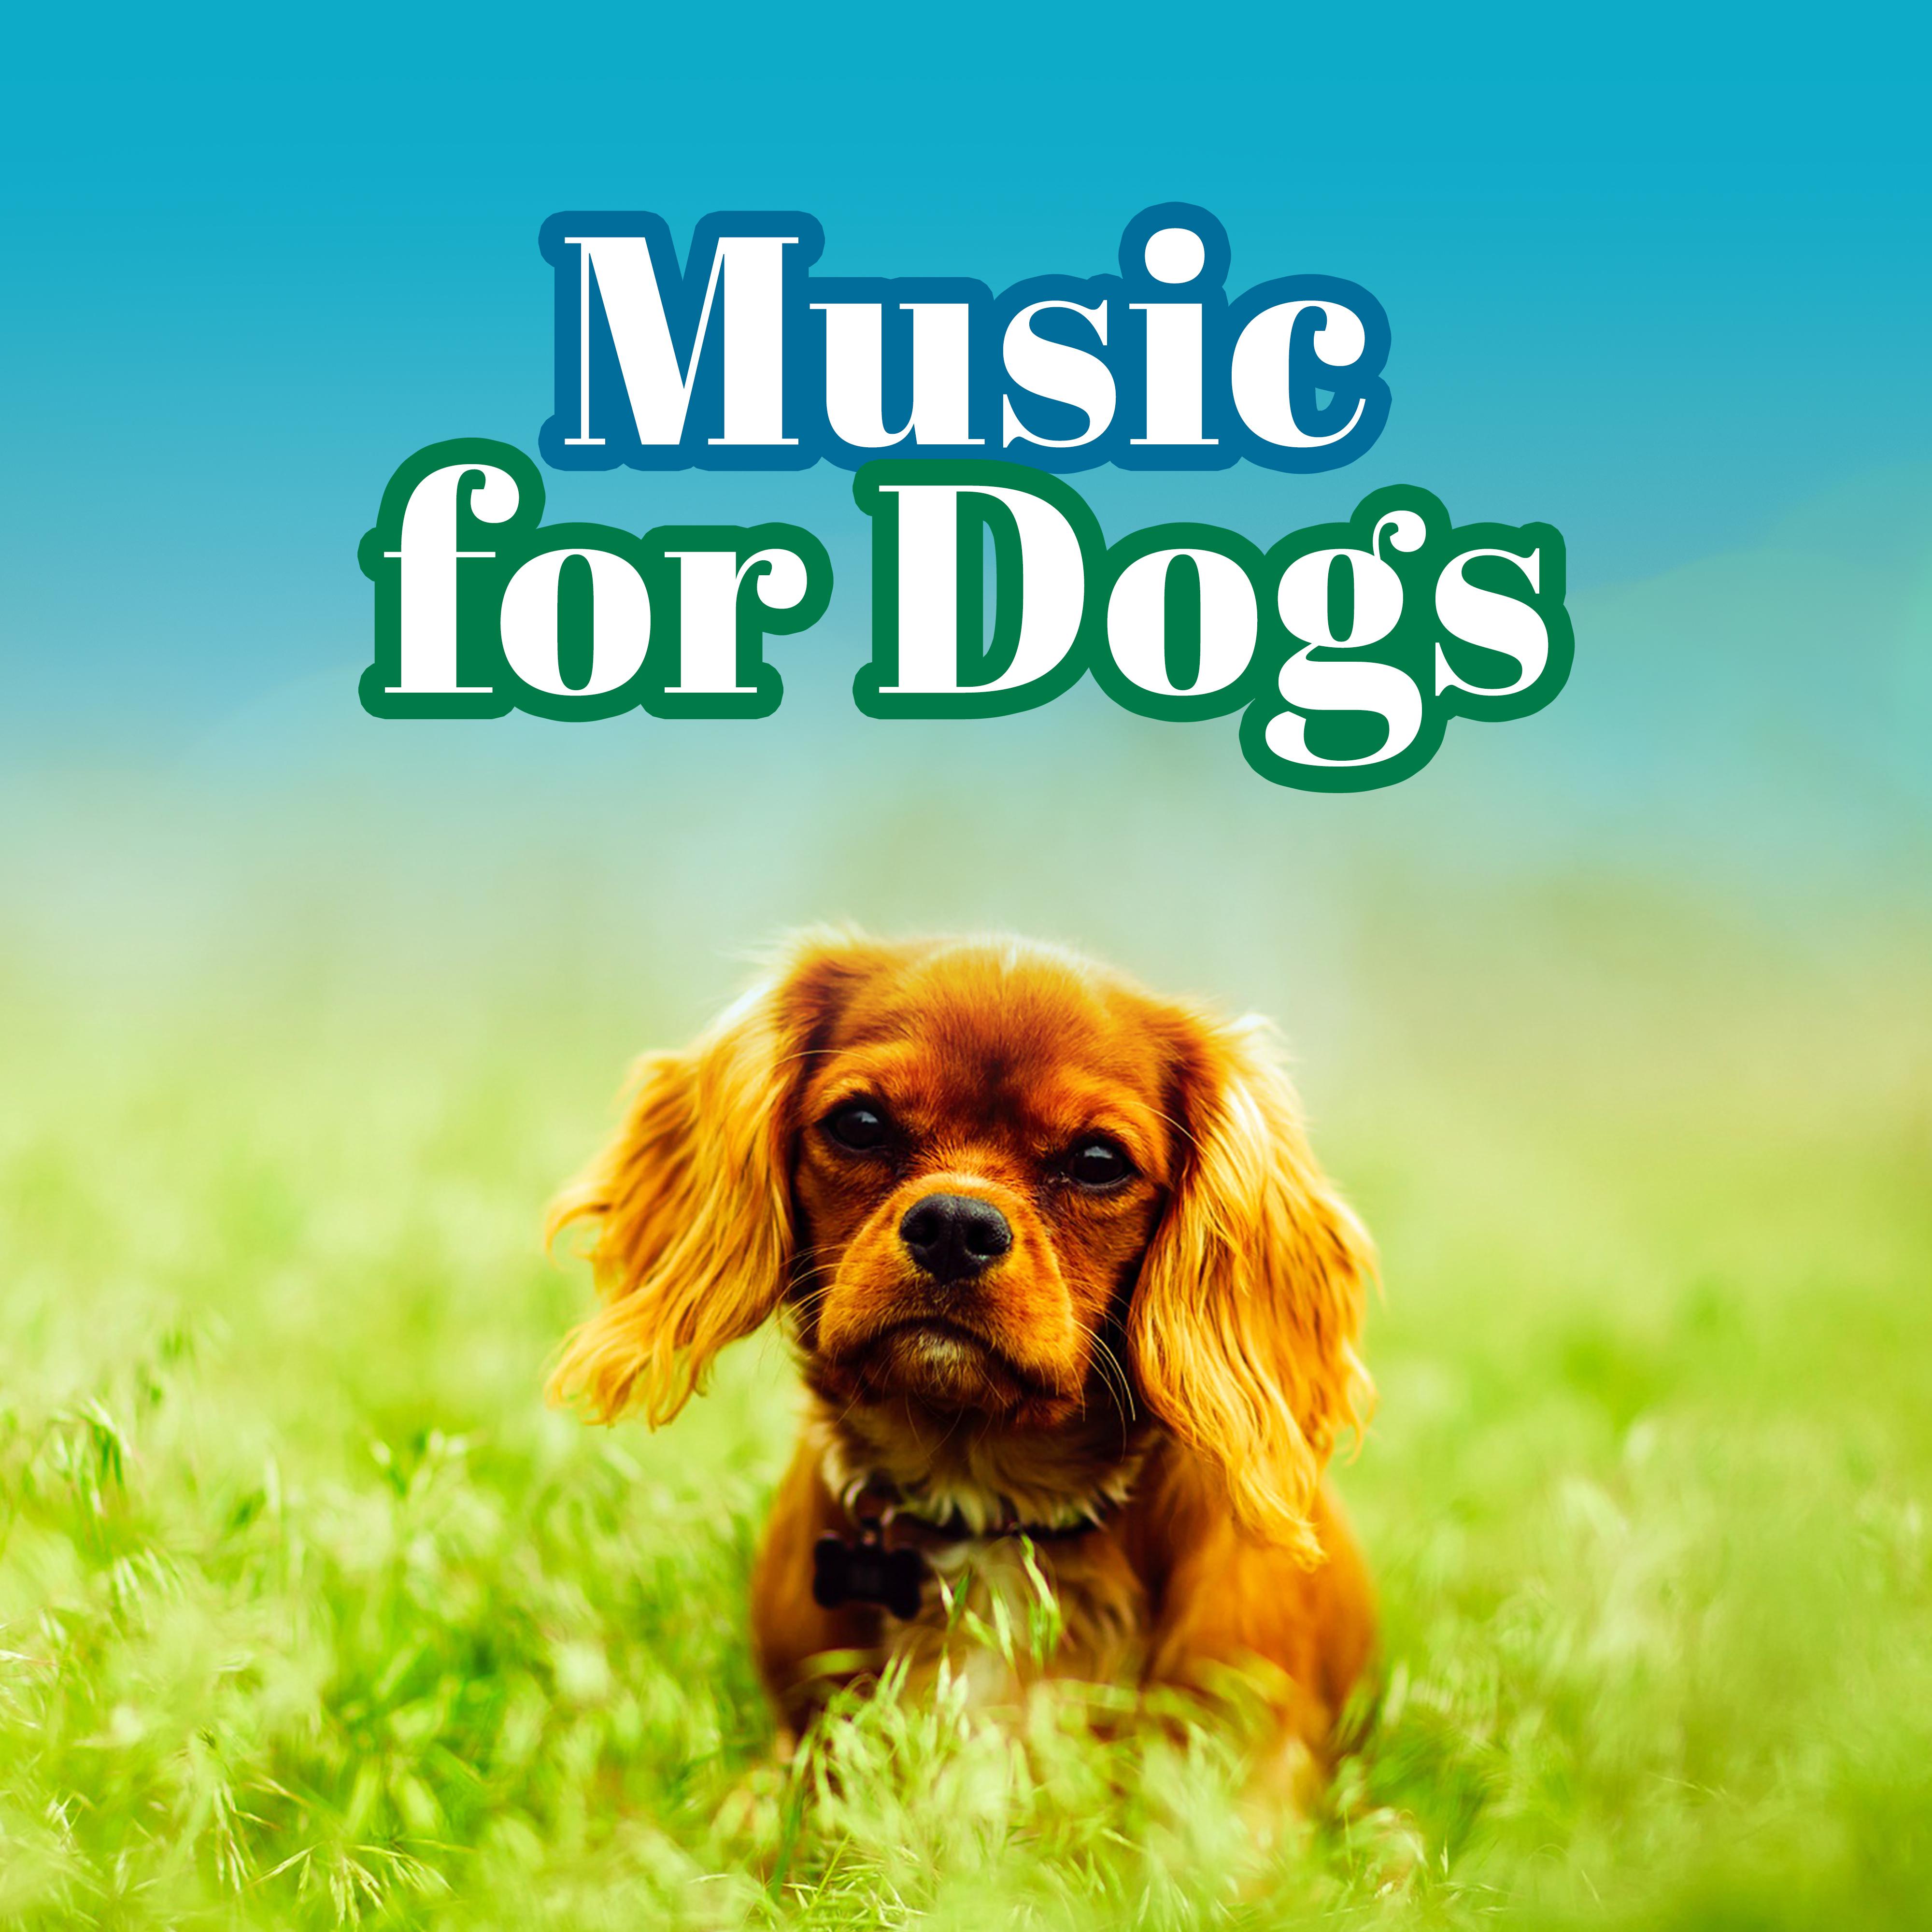 Music for Dogs – 15 Best Relaxing Songs for Pets, Piano Dog Music, Pet Therapy, Sleeping Music for Pets